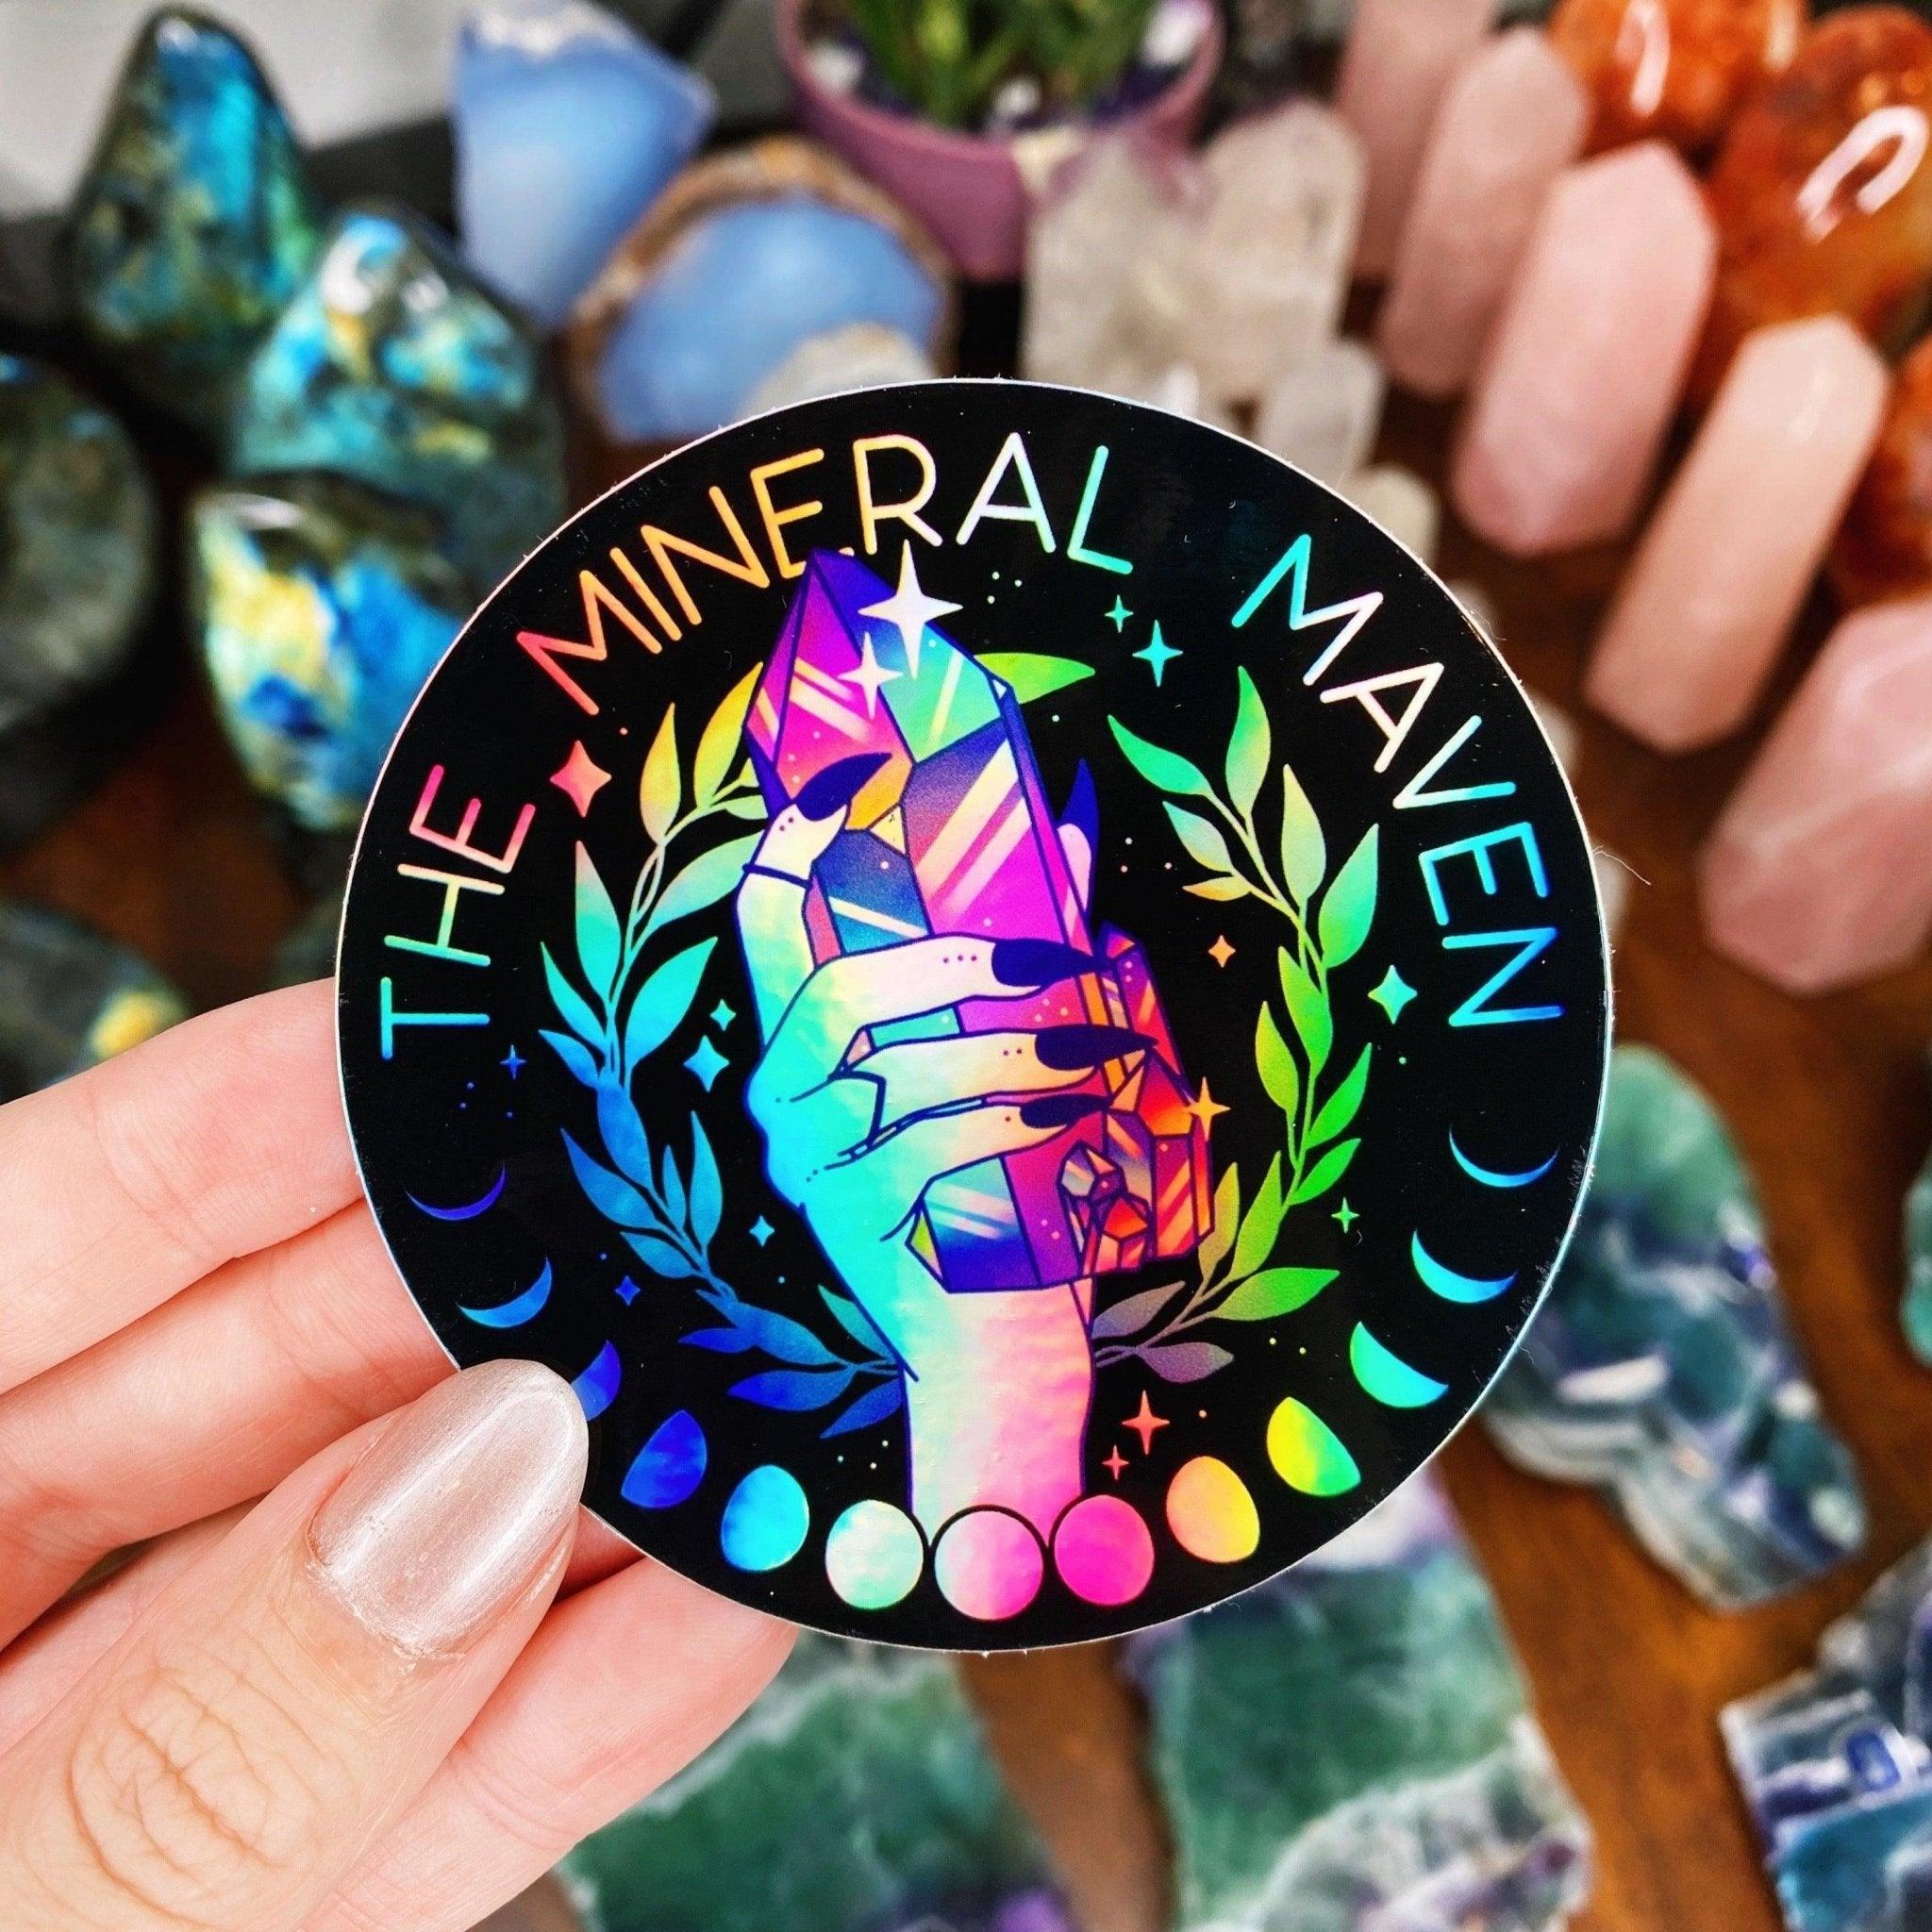 HOLOGRAPHIC MM LOGO STICKER - 33 bday, 444 sale, energy tool, holiday sale, merch, sticker - The Mineral Maven